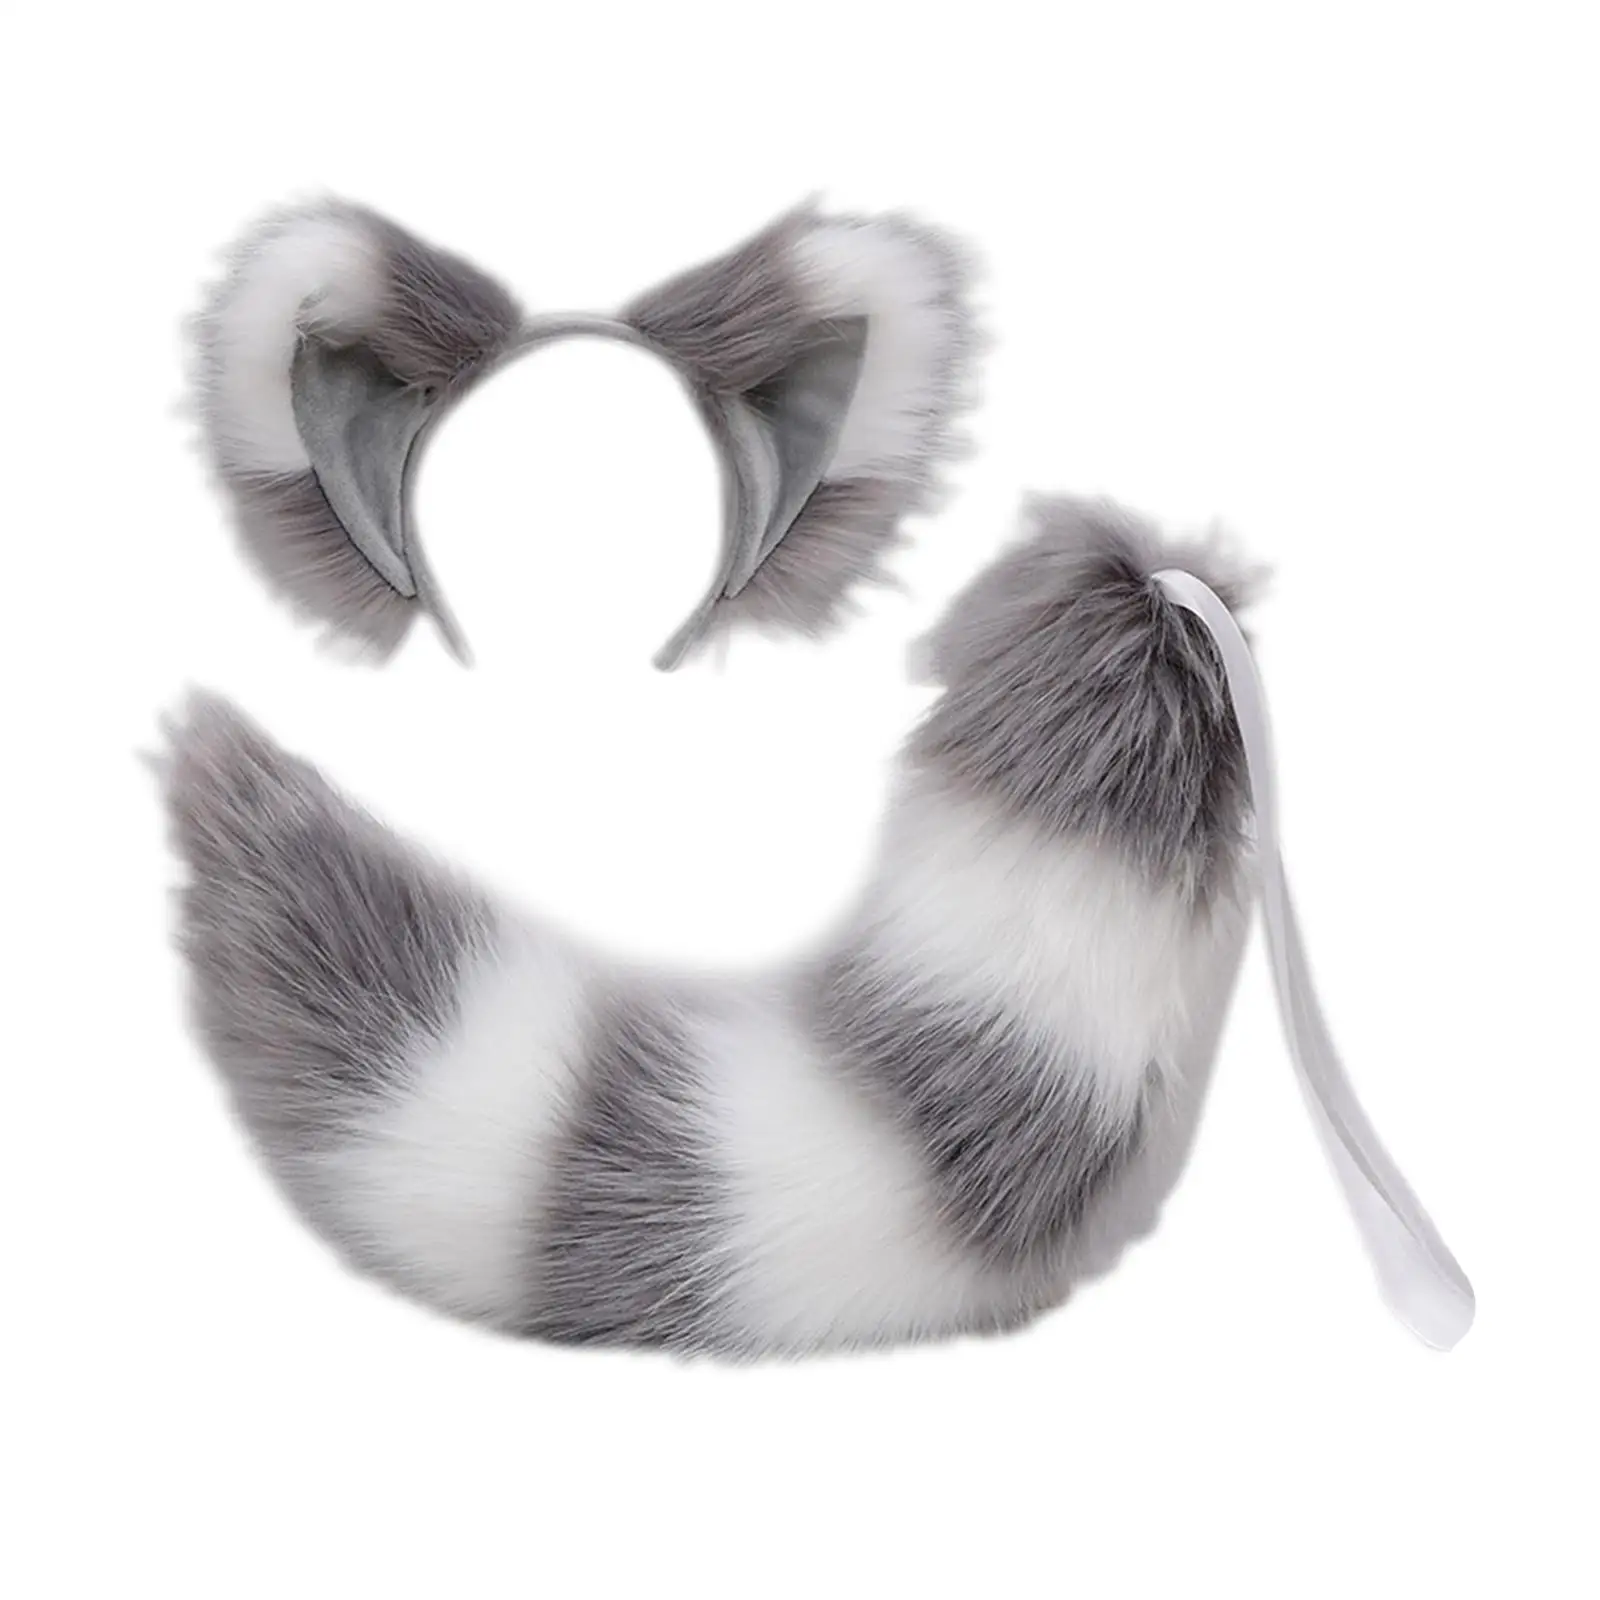 Plush Cats Ears Hair Hoop Tail Cosplay Headpiece Hair Accessories Decoration Headwear for Children Stage Shows Carnival Party